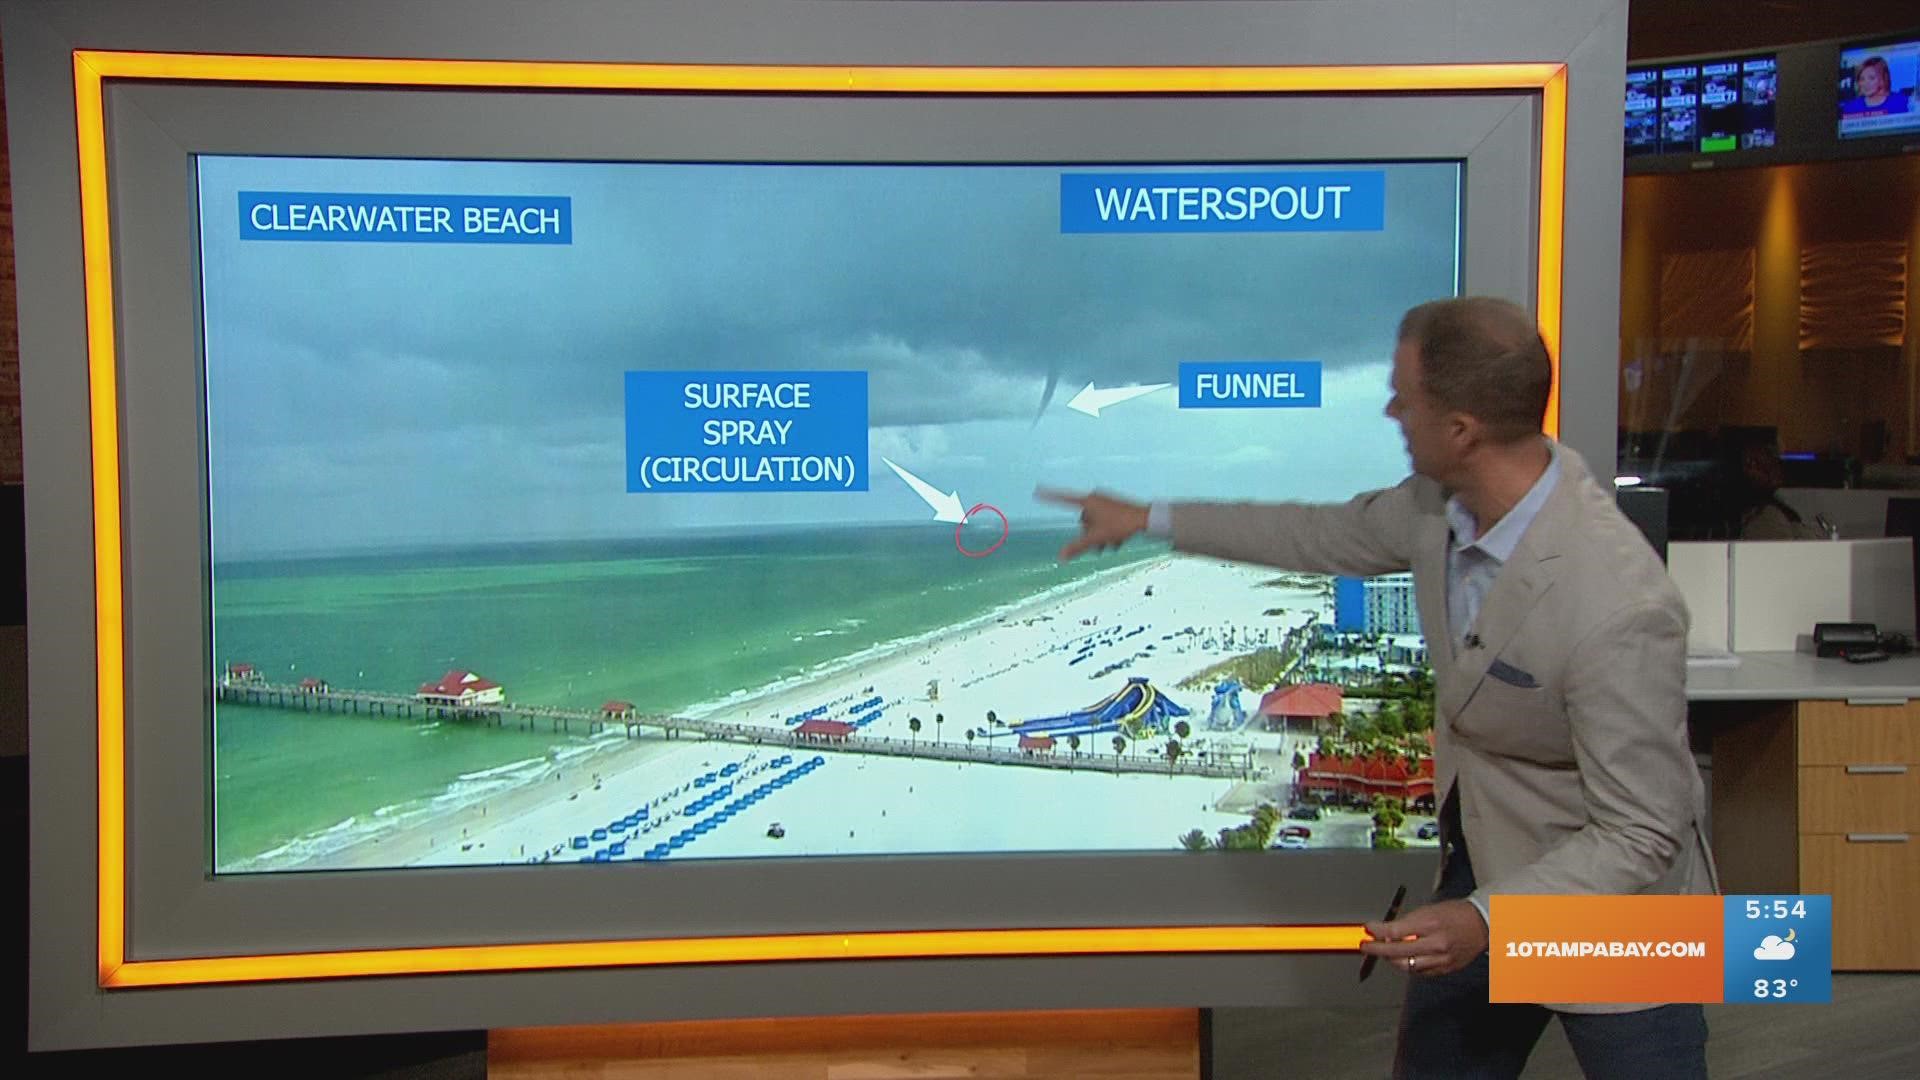 Yesterday over Clearwater Beach we saw a waterspout become a landspout, but technically not a tornado. Meteorologist Grant Gilmore explains why there's a difference.